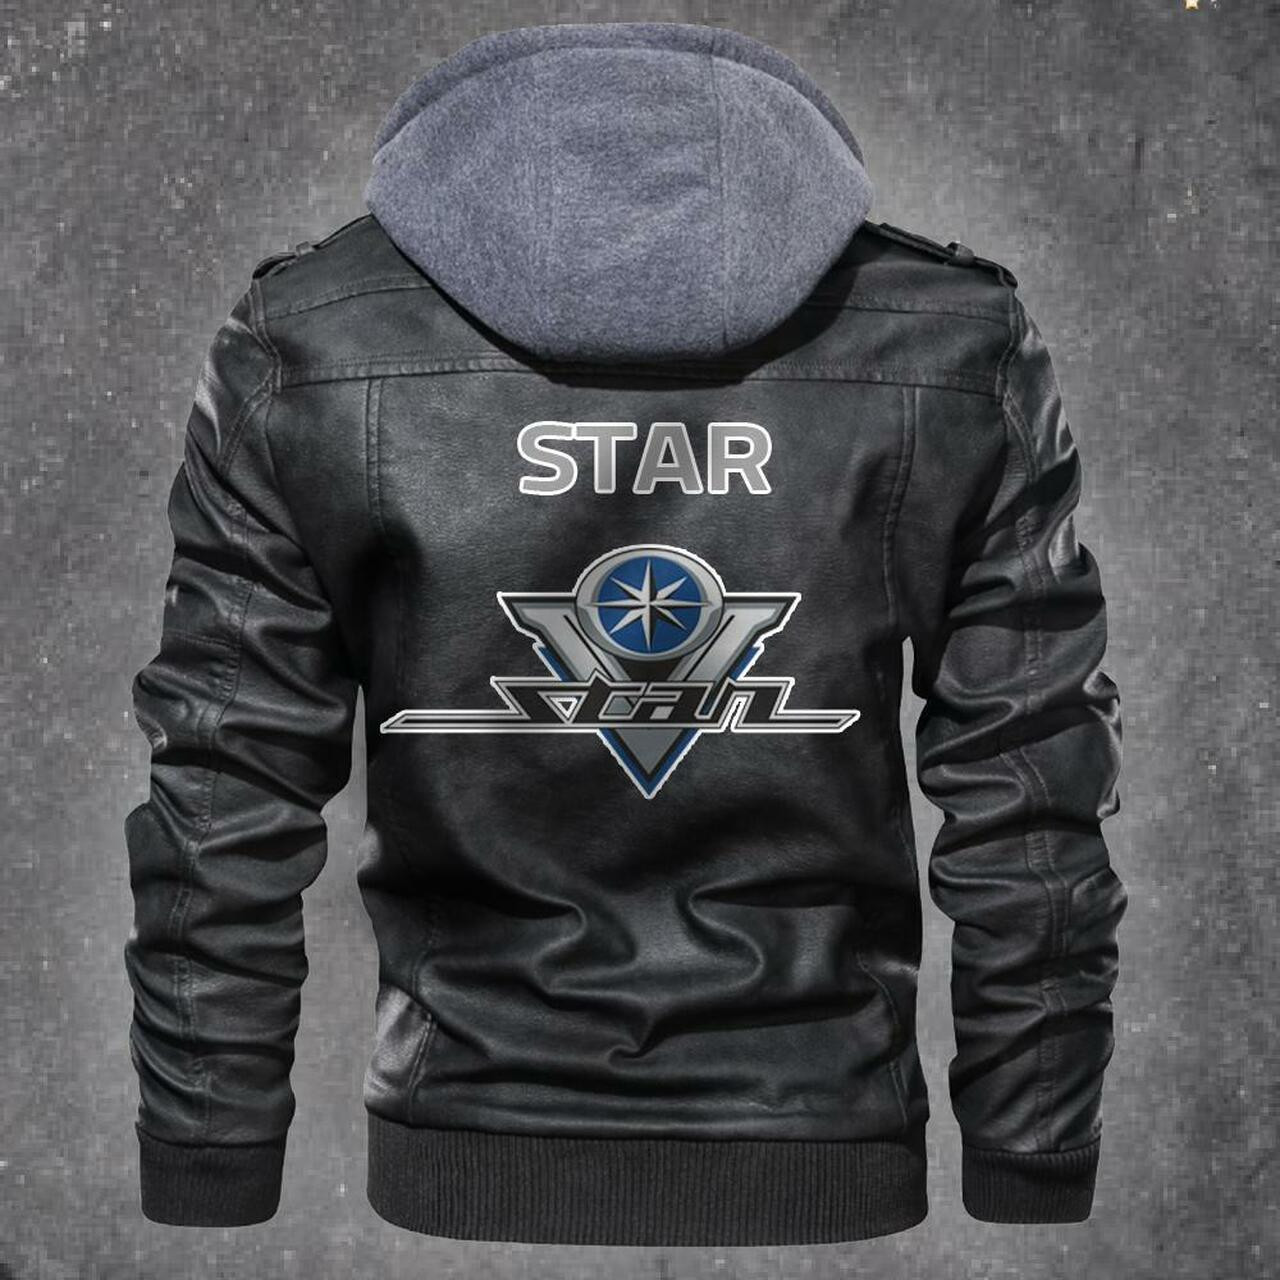 Are you looking for a great leather jacket? 279